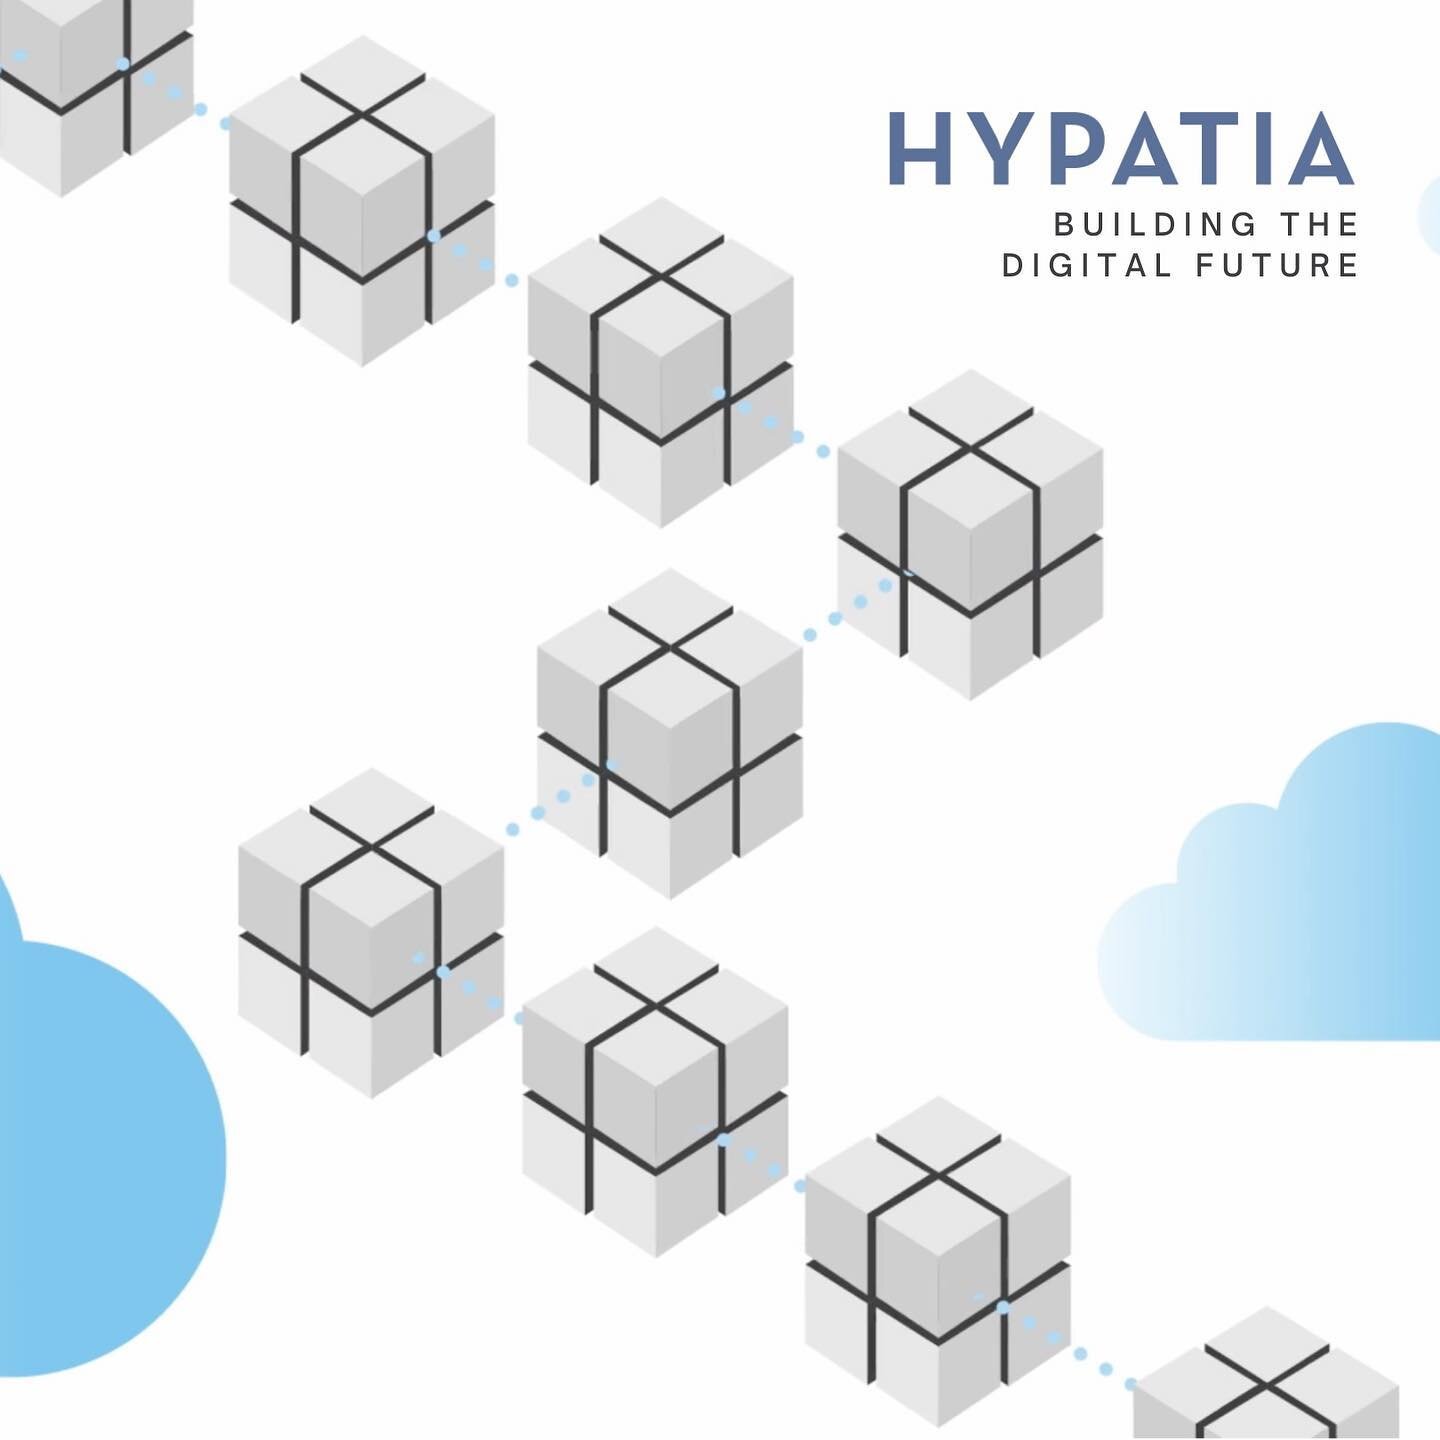 Hypatia is a software engineering and IT infrastructure company that builds platform technologies for global health and cooperation, integrating the emerging technologies of our age. We work on hard problems at the interface of hardware, software and